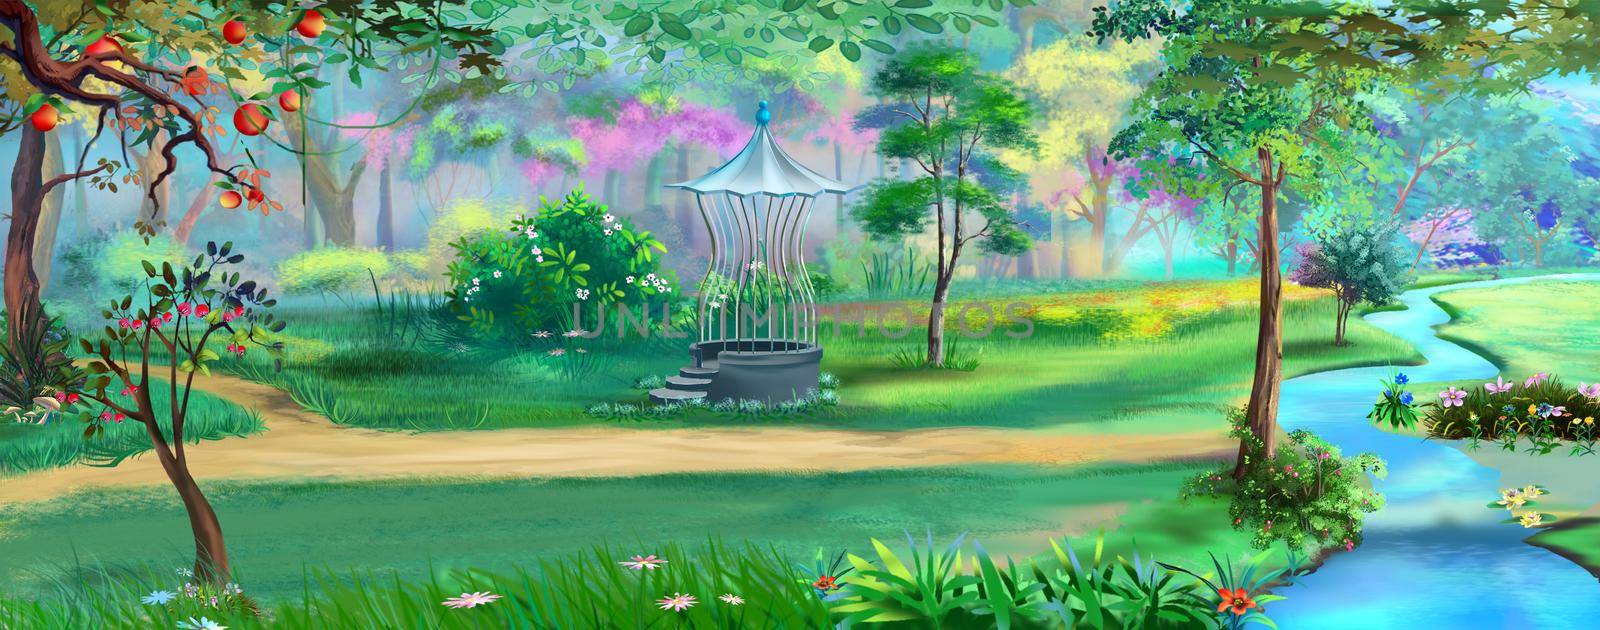 Pathway in a public or city park with bridge over a stream. Digital Painting Background, Illustration.